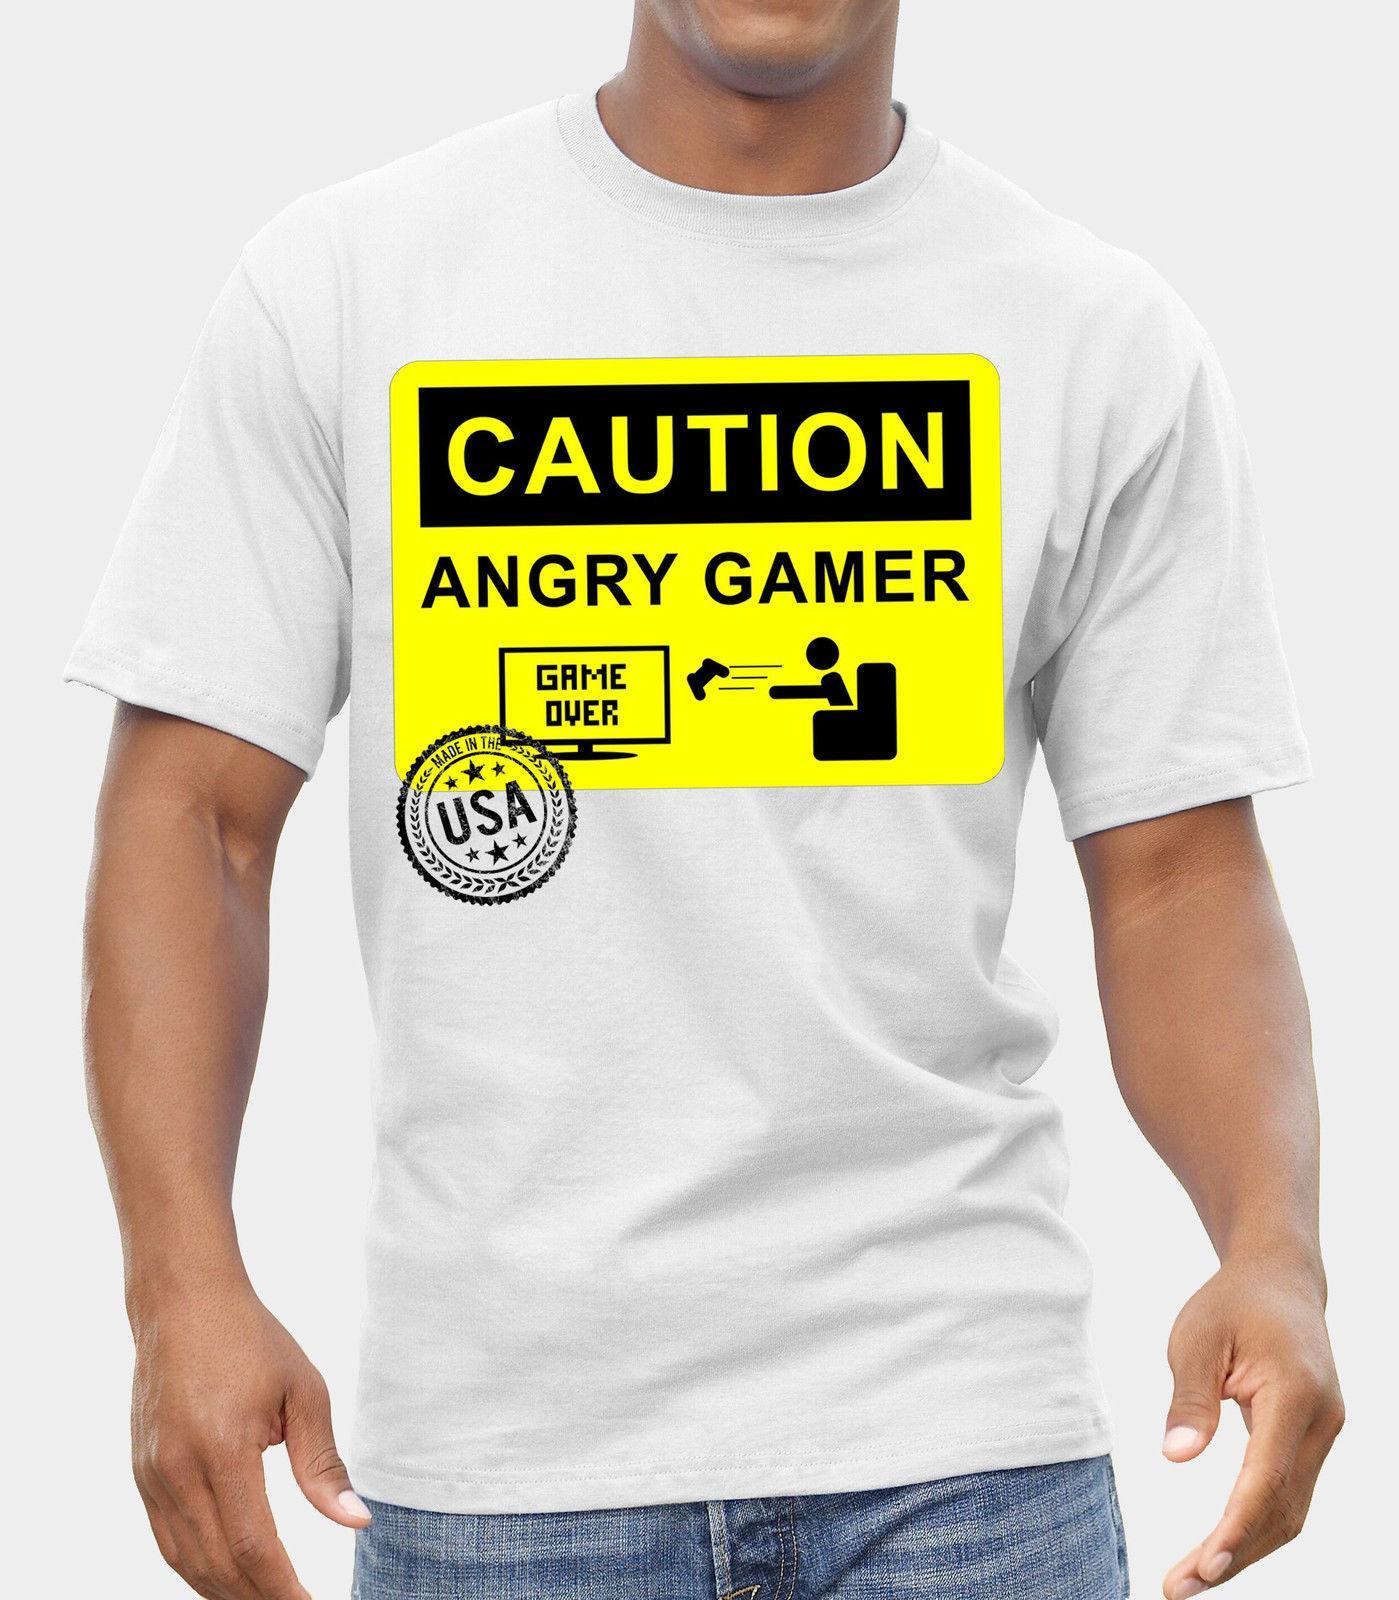 Angry Gamer Logo - Caution Angry Gamers LOGO T Shirt Oldschool Vintage FRUIT OF THE ...